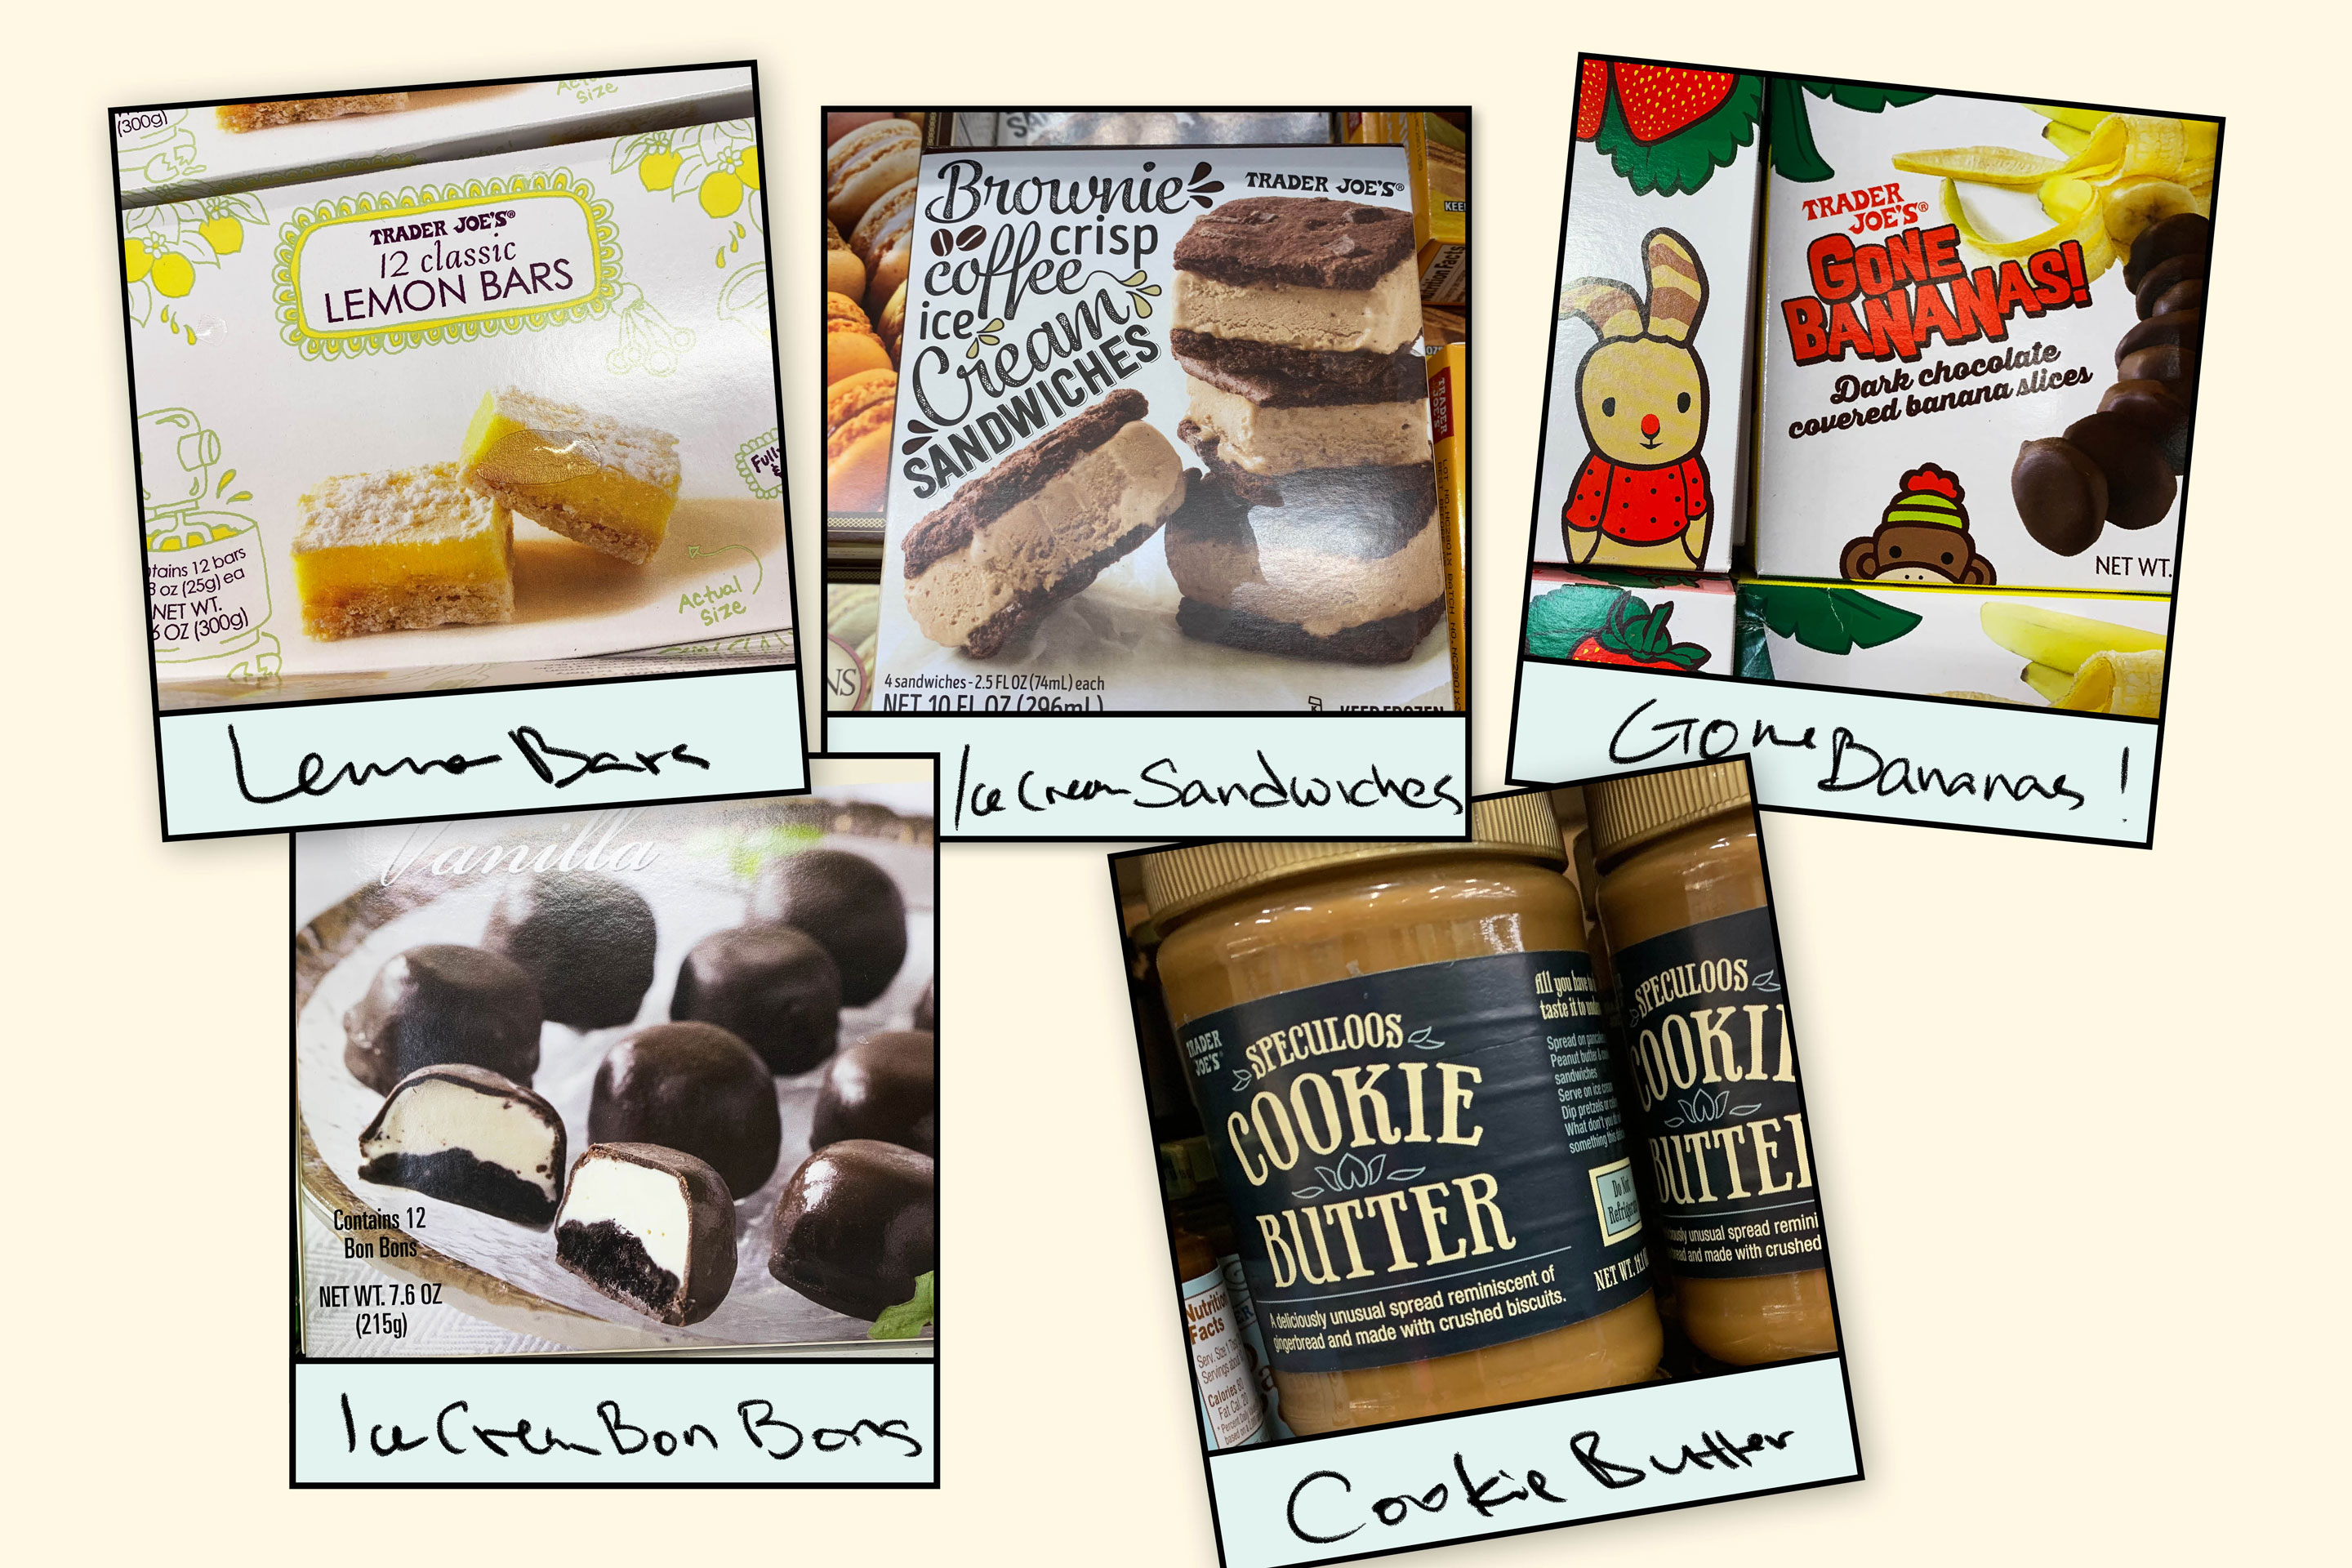 9 Decadent Trader Joe’s Desserts I Can Never Resist — And They're All Under $6